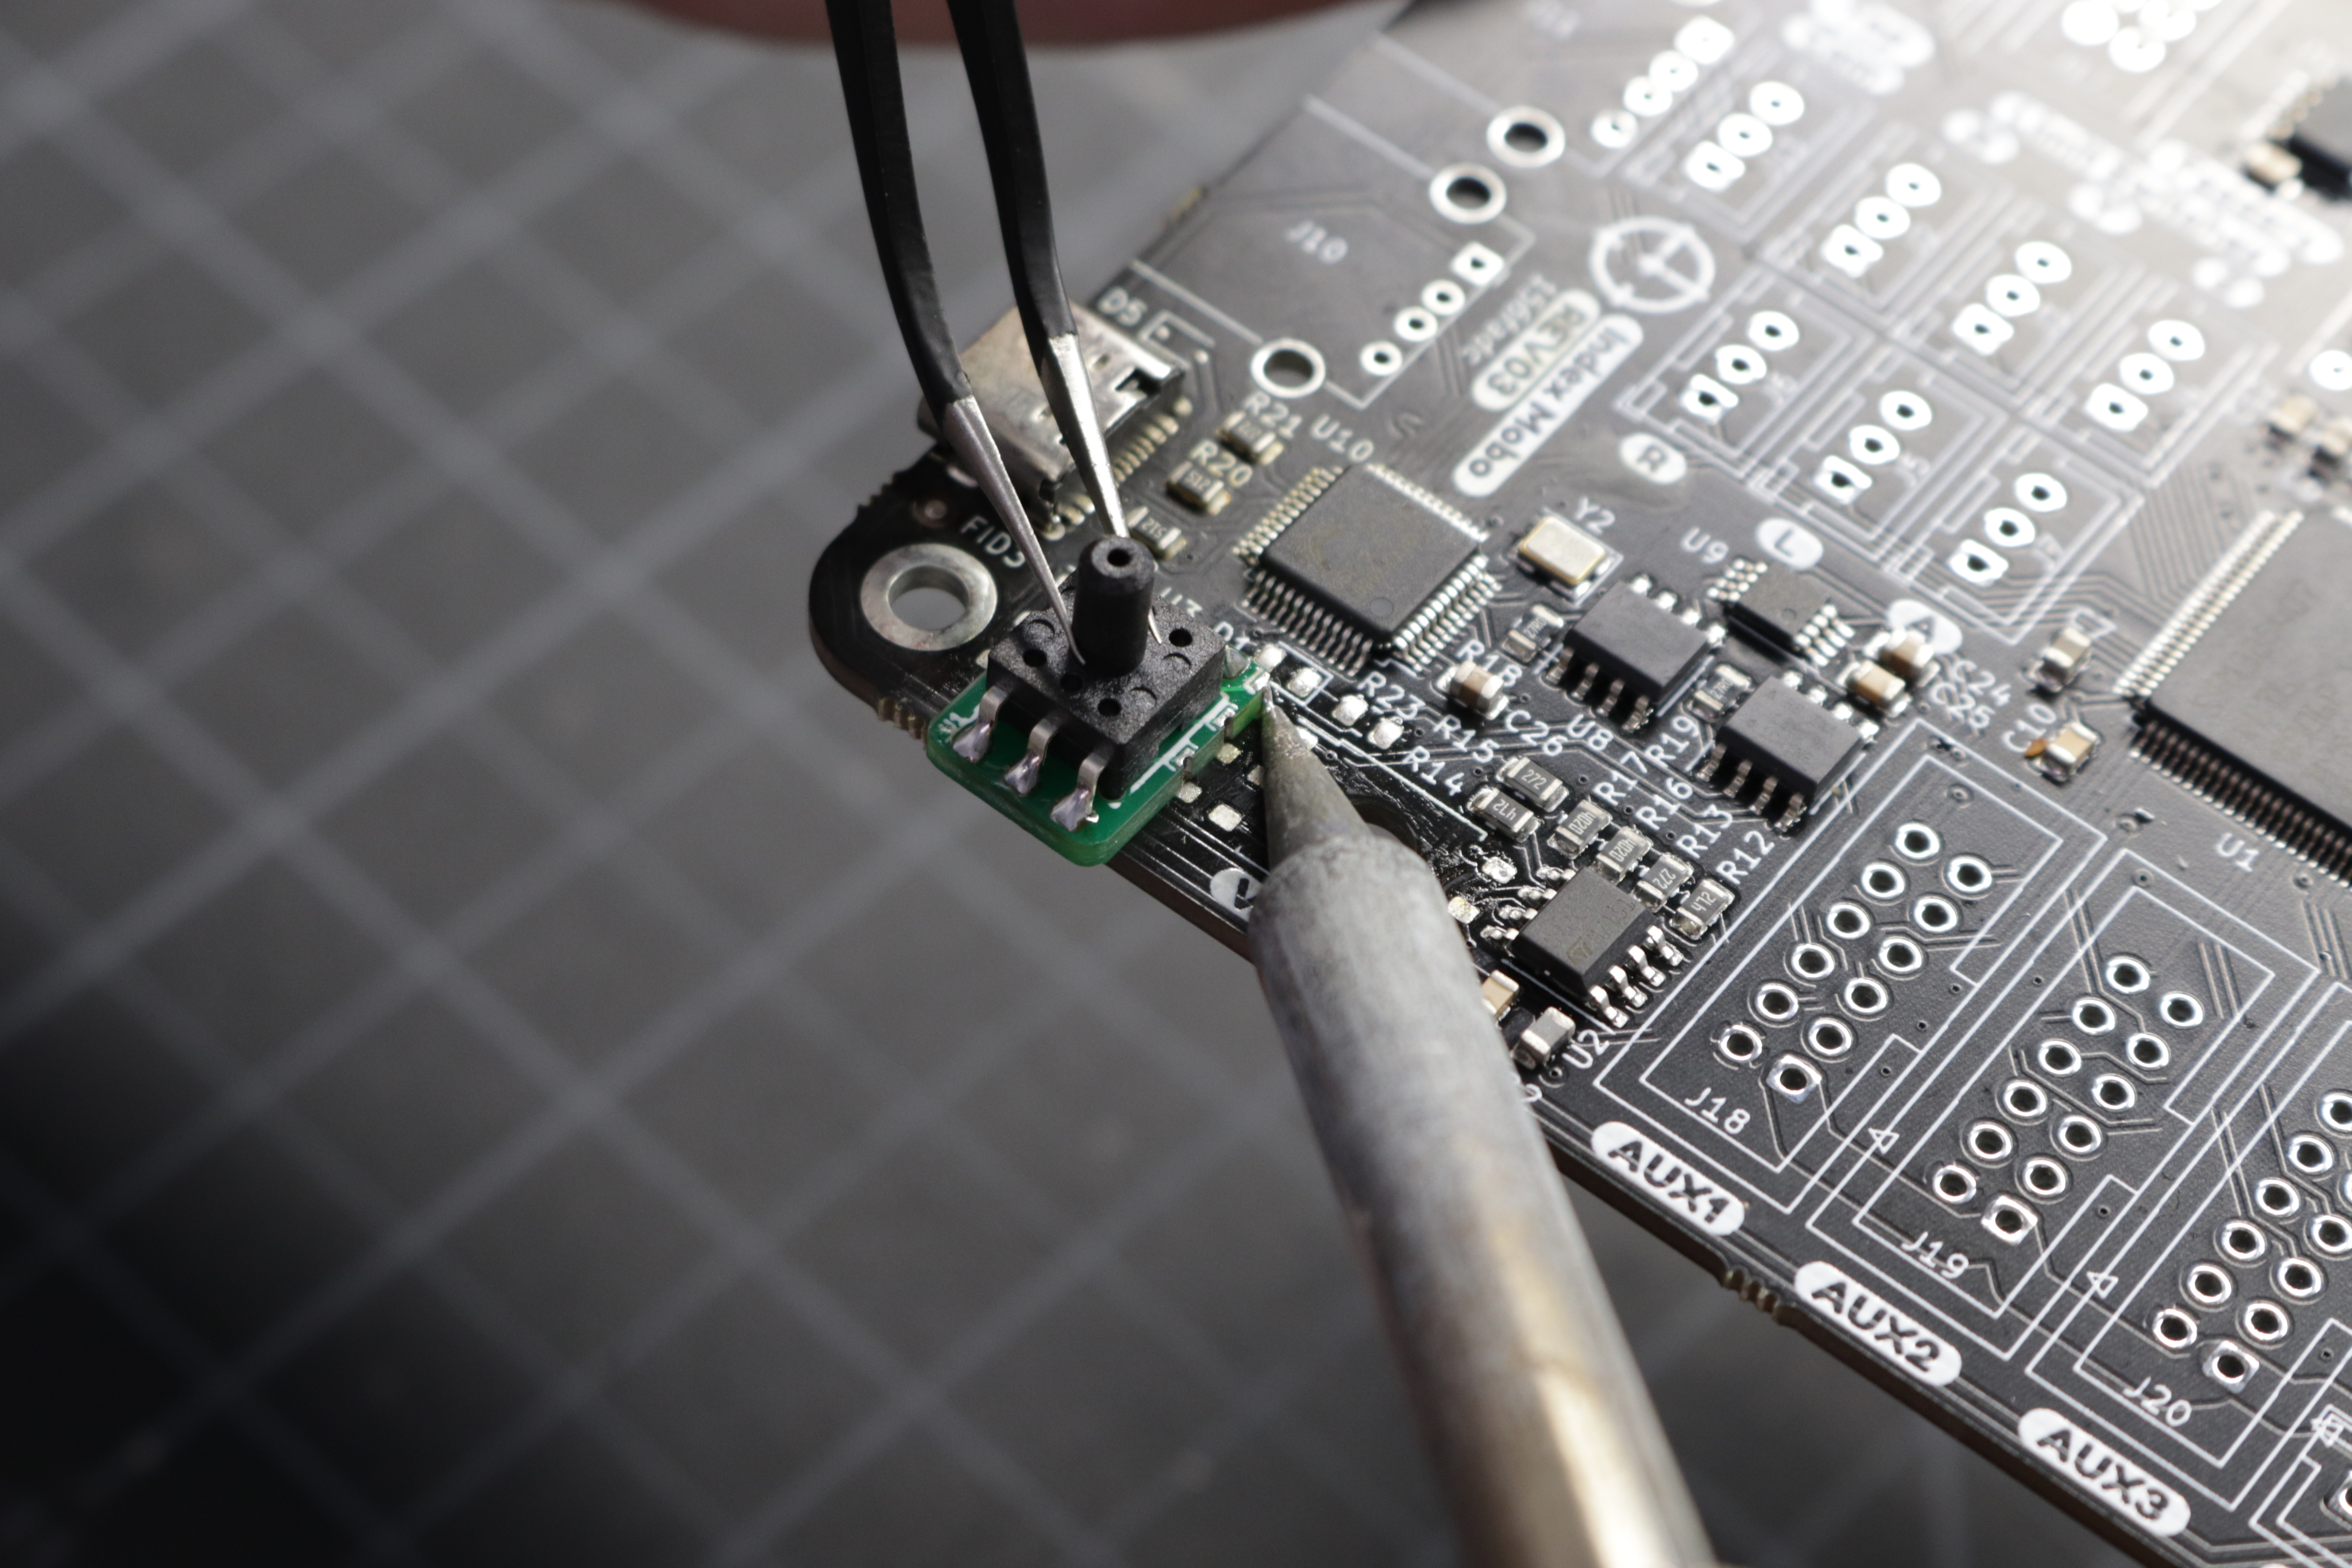 A photo of the interposer board held in place using the one soldered pad